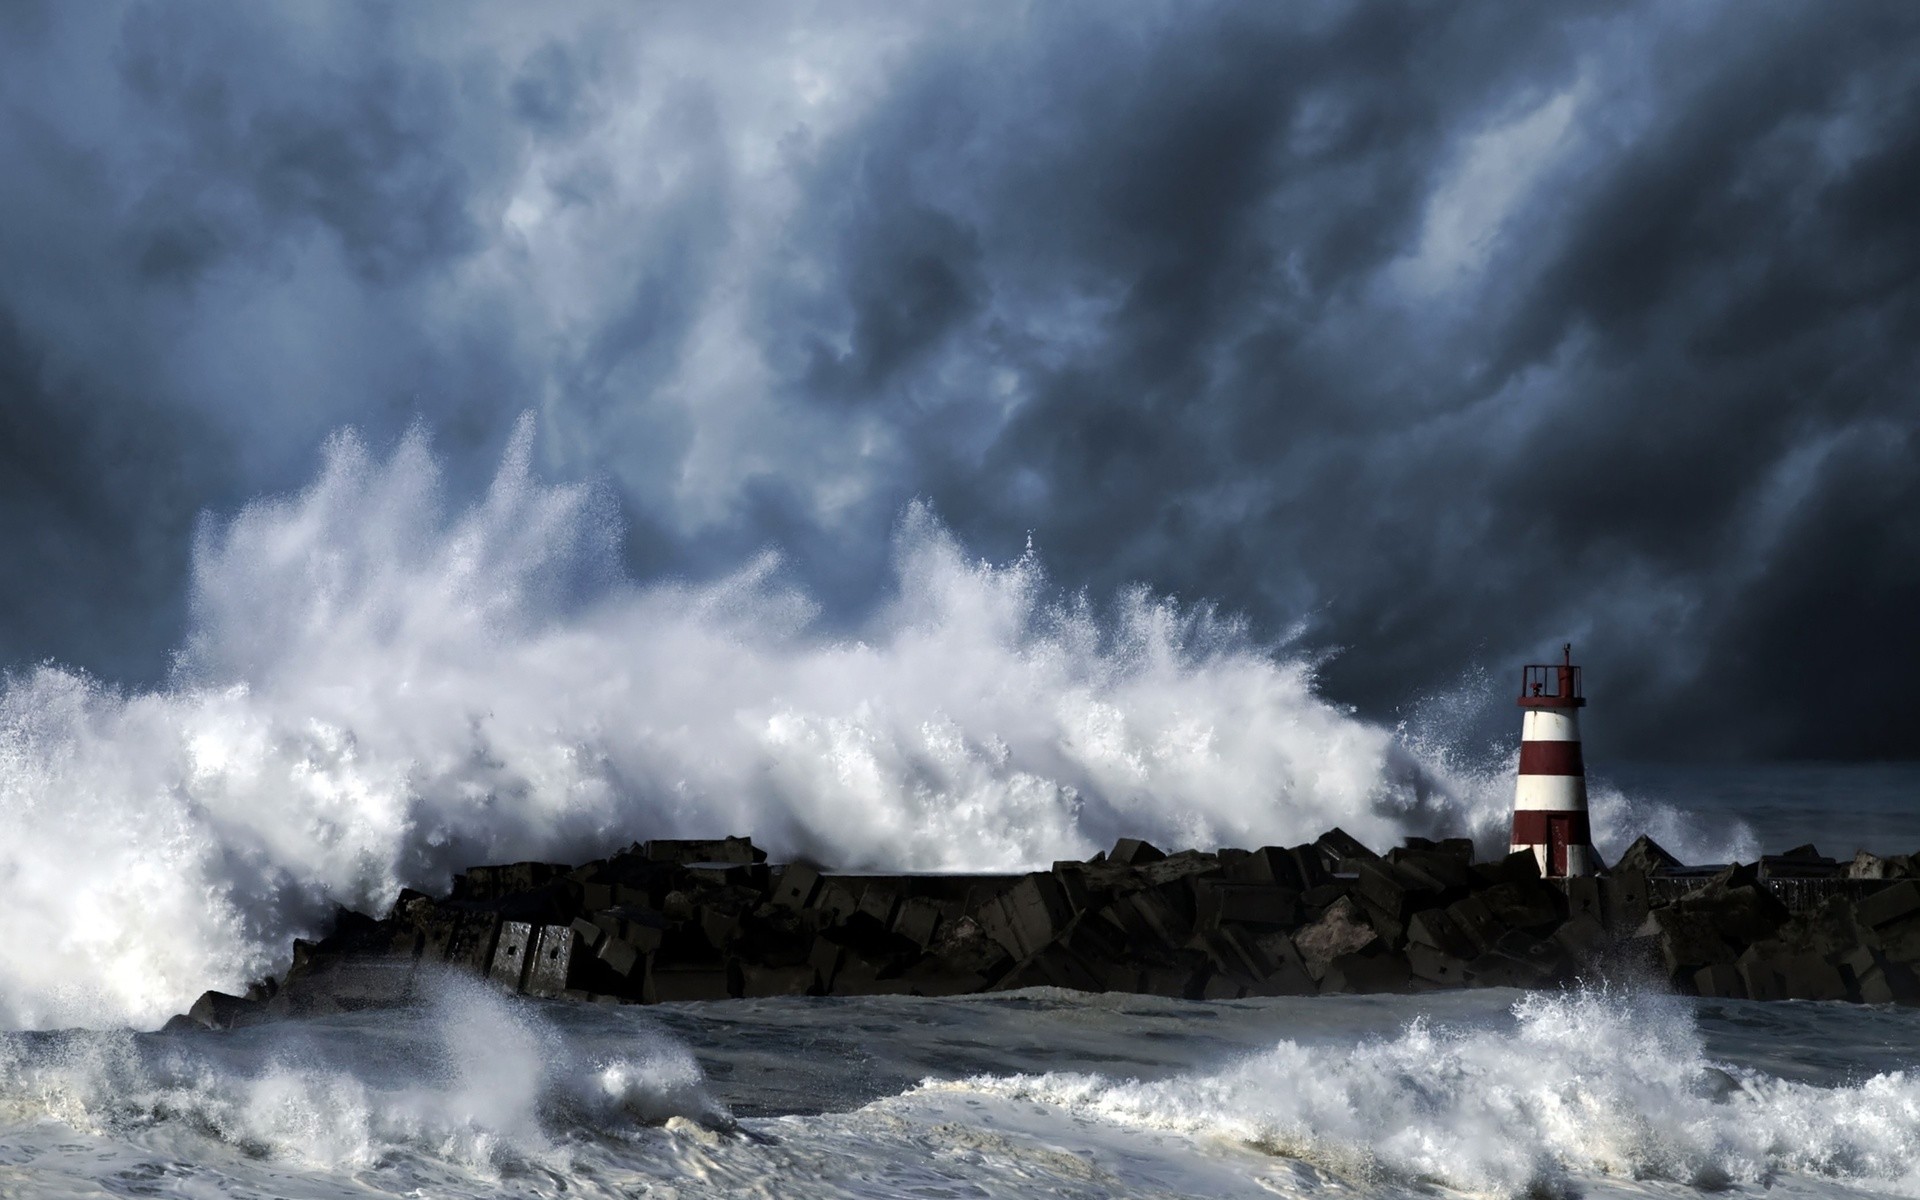 Light streaming over a stormy sea from a lighthouse on a rocky shore. Description from